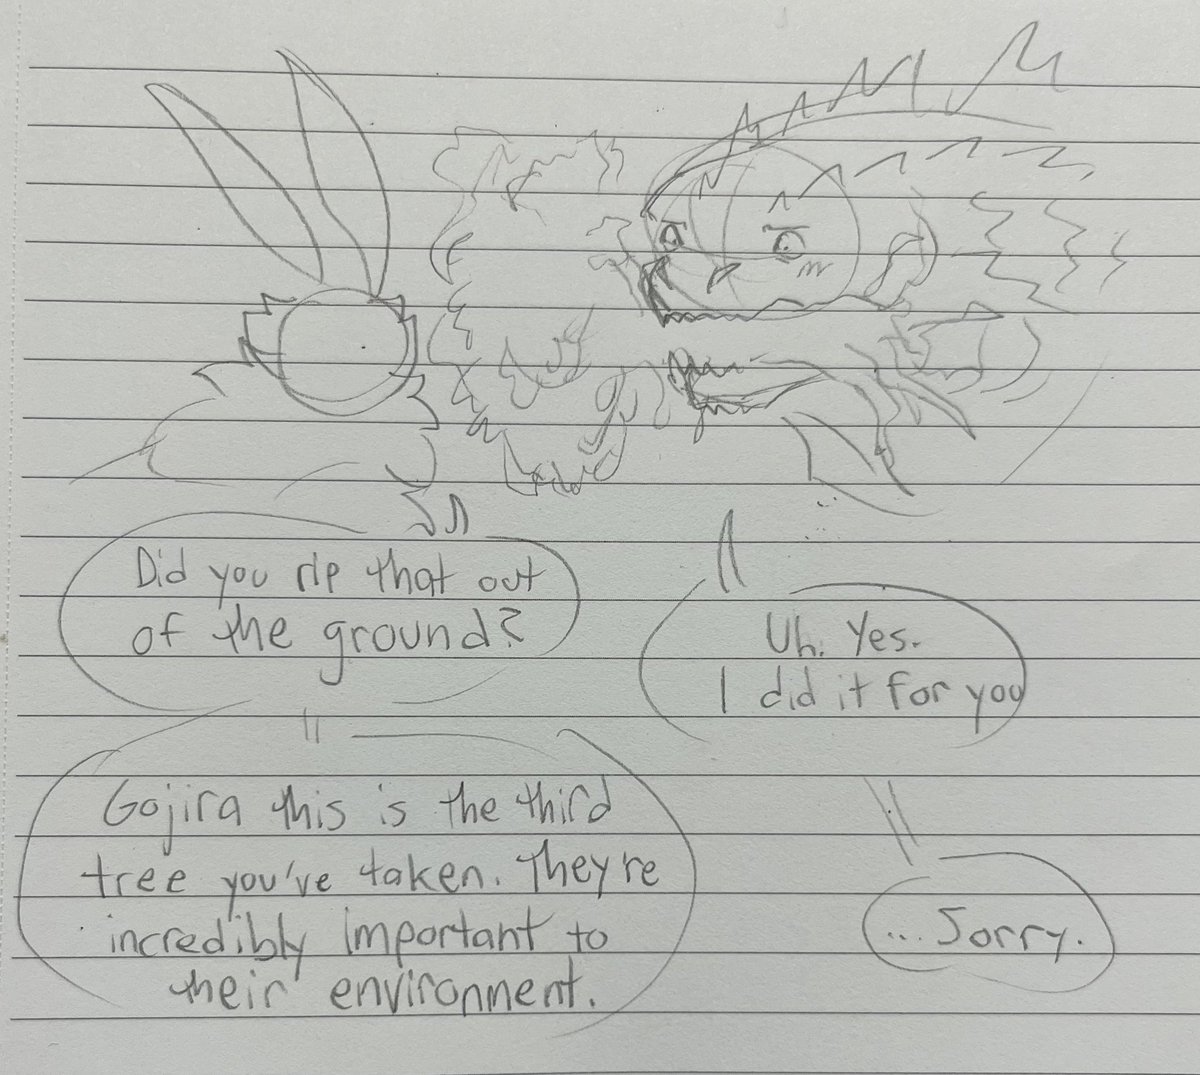 I get the logic behind Mothzilla posts where Godzilla gives her big flowering trees but I think it’d be funnier if she reacted like this